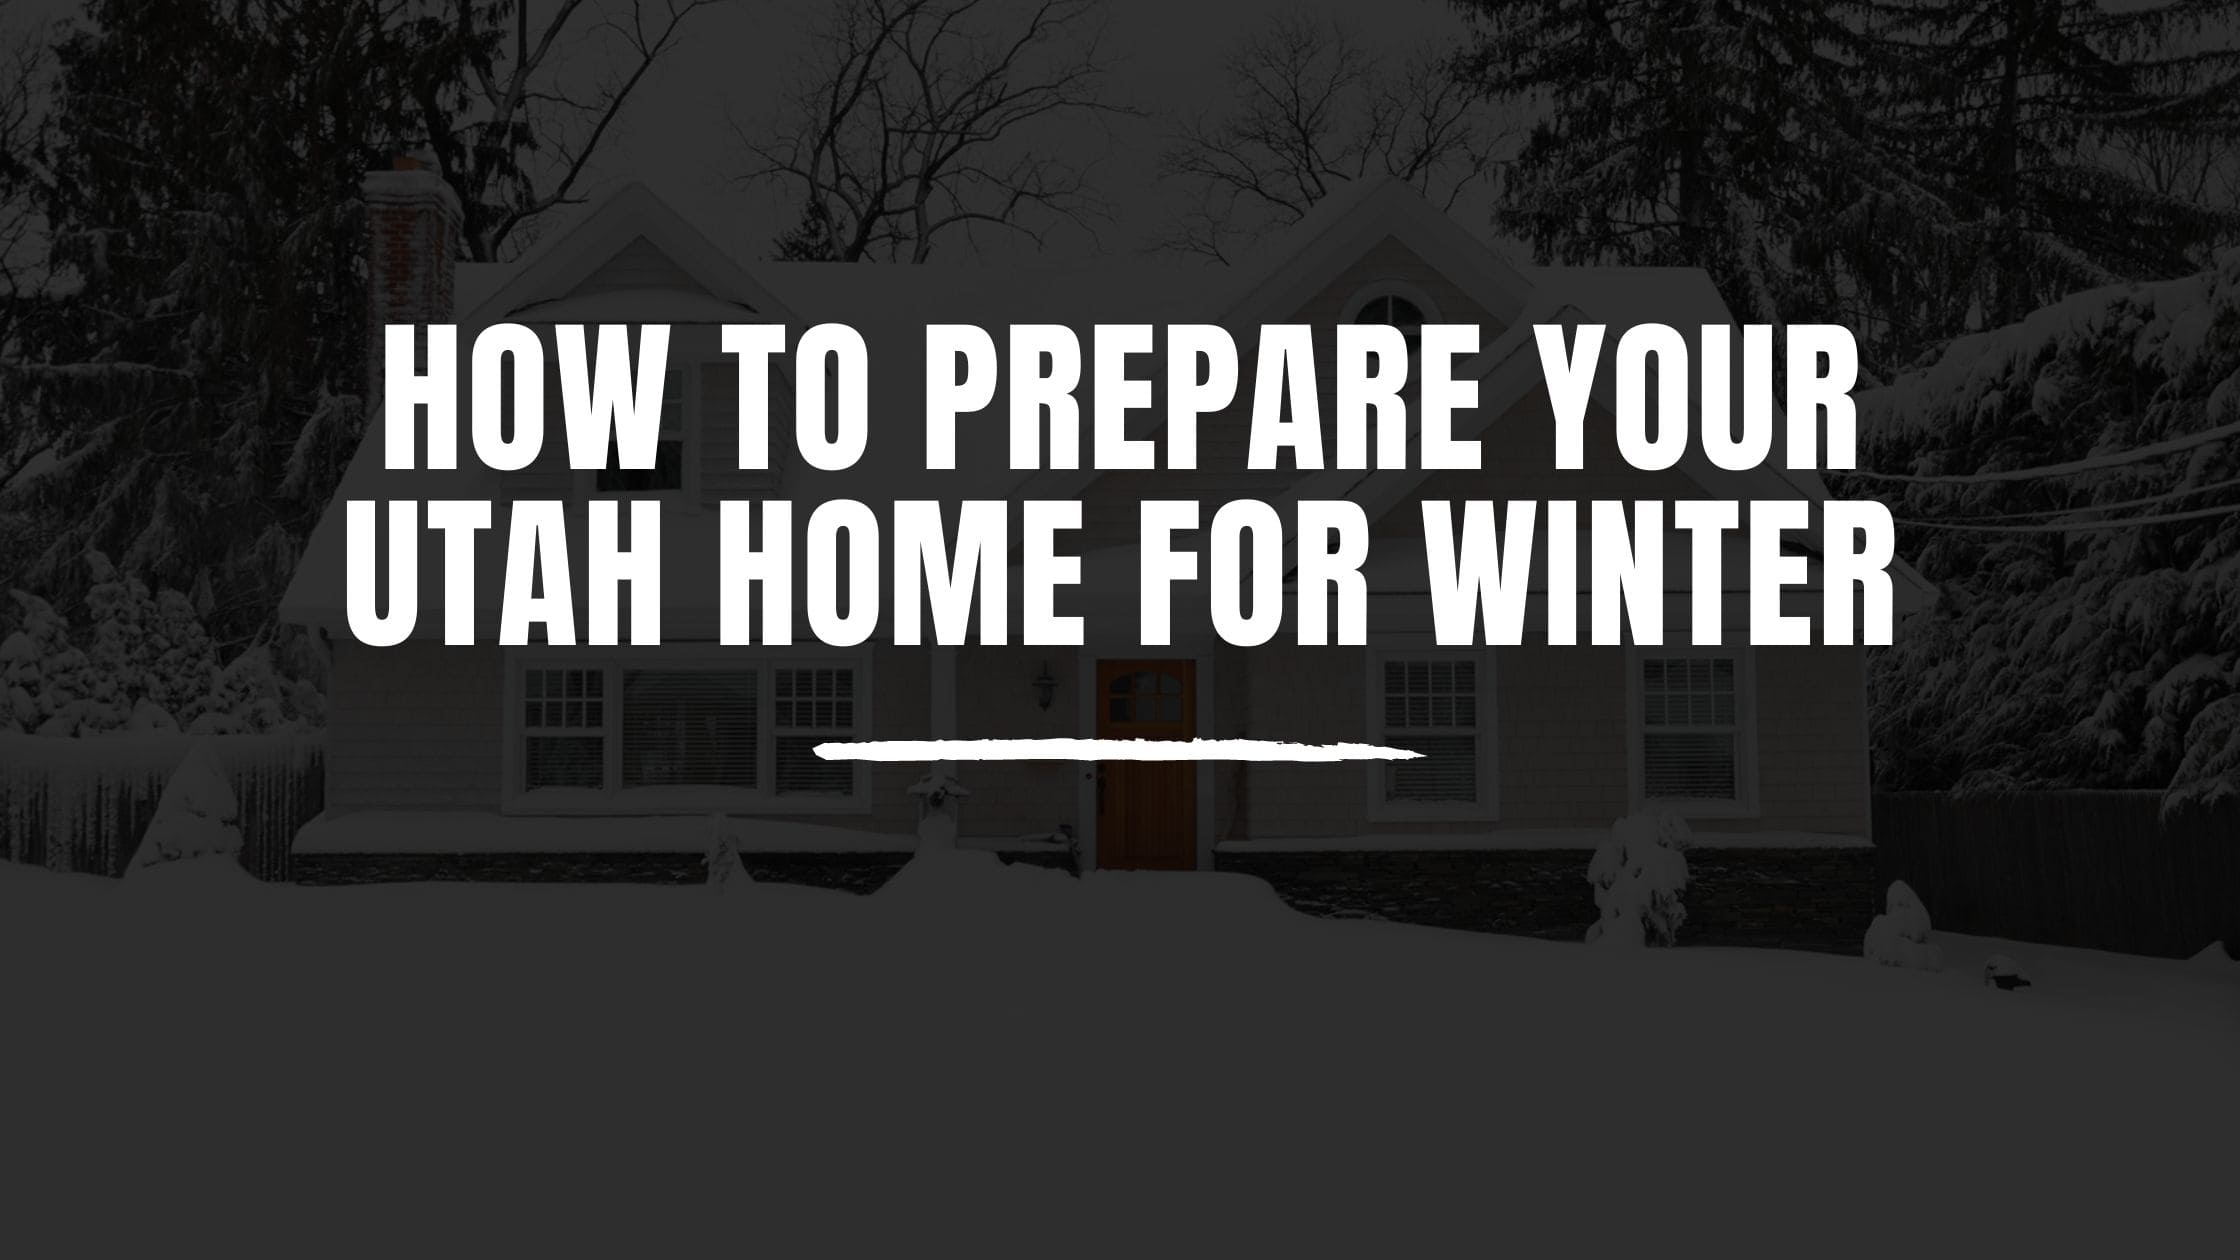 How to Prepare Your Utah Home for Winter